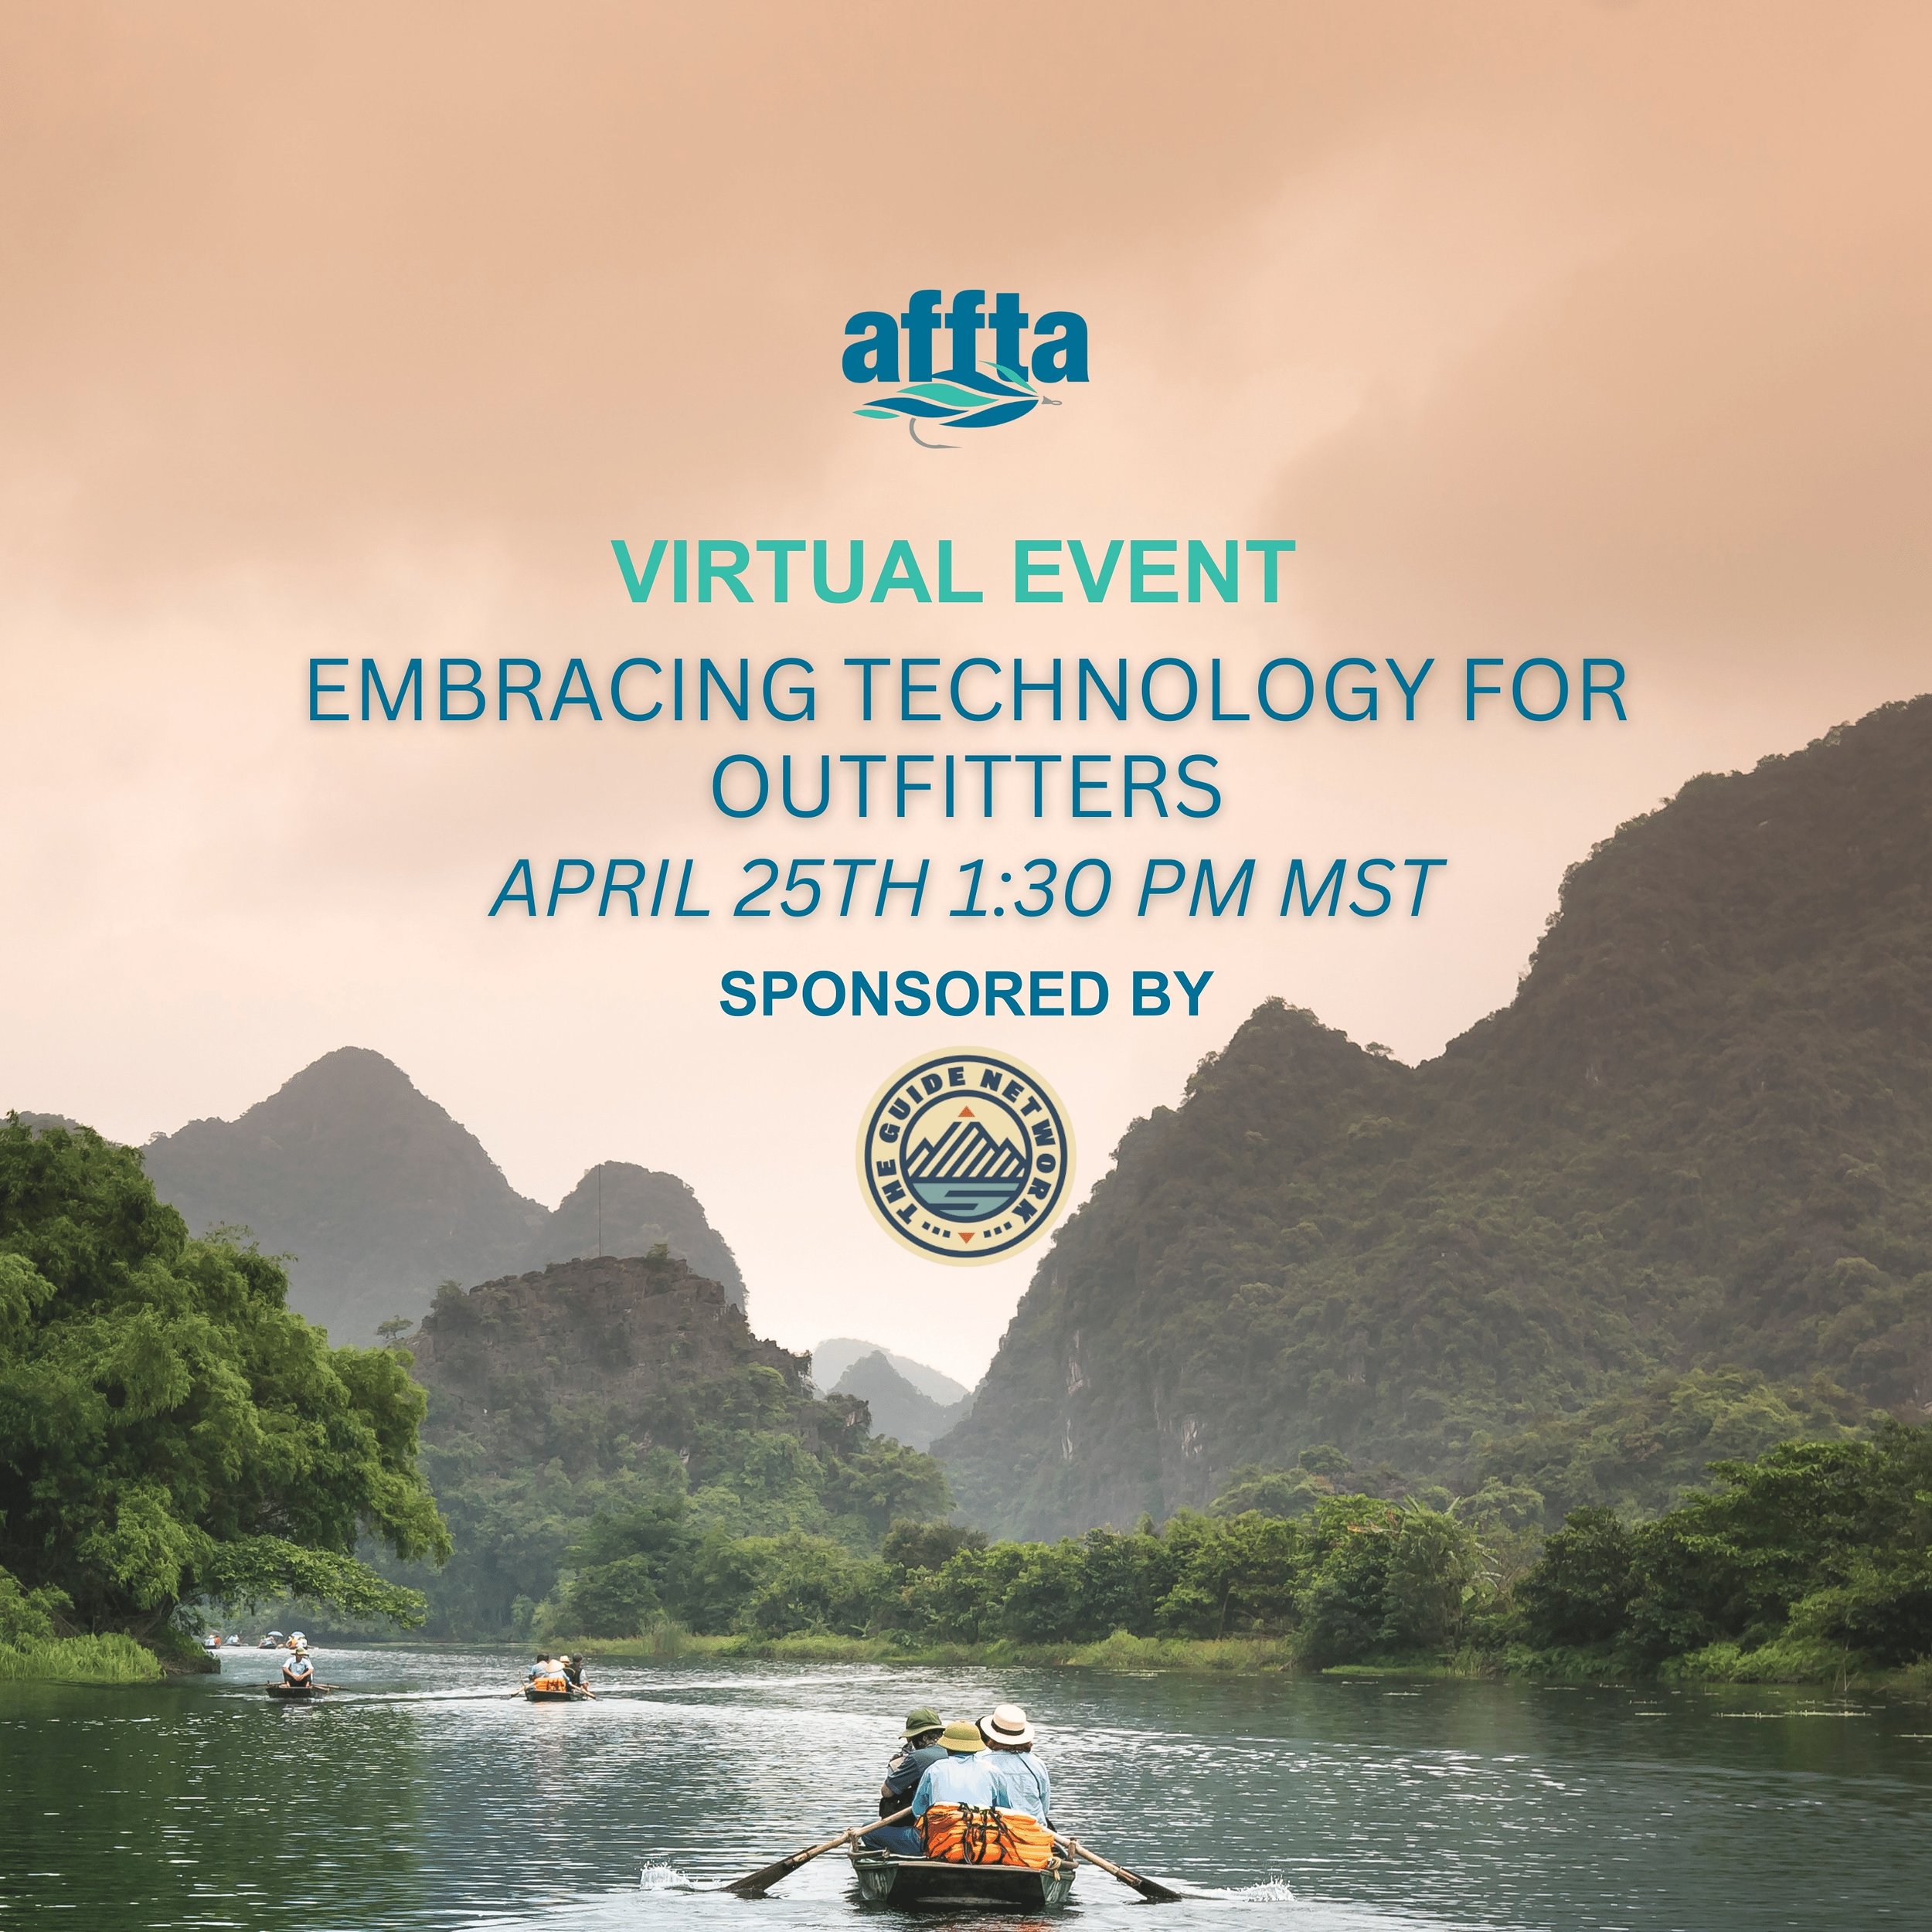 Virtual Event: Embracing Technology for Outfitters presented by @theguidenetwork this Thursday, April 25 1:30 PM MST

The technology landscape is changing and quickly evolving for outfitters. The Guide Network is aiming to create solutions for outfit